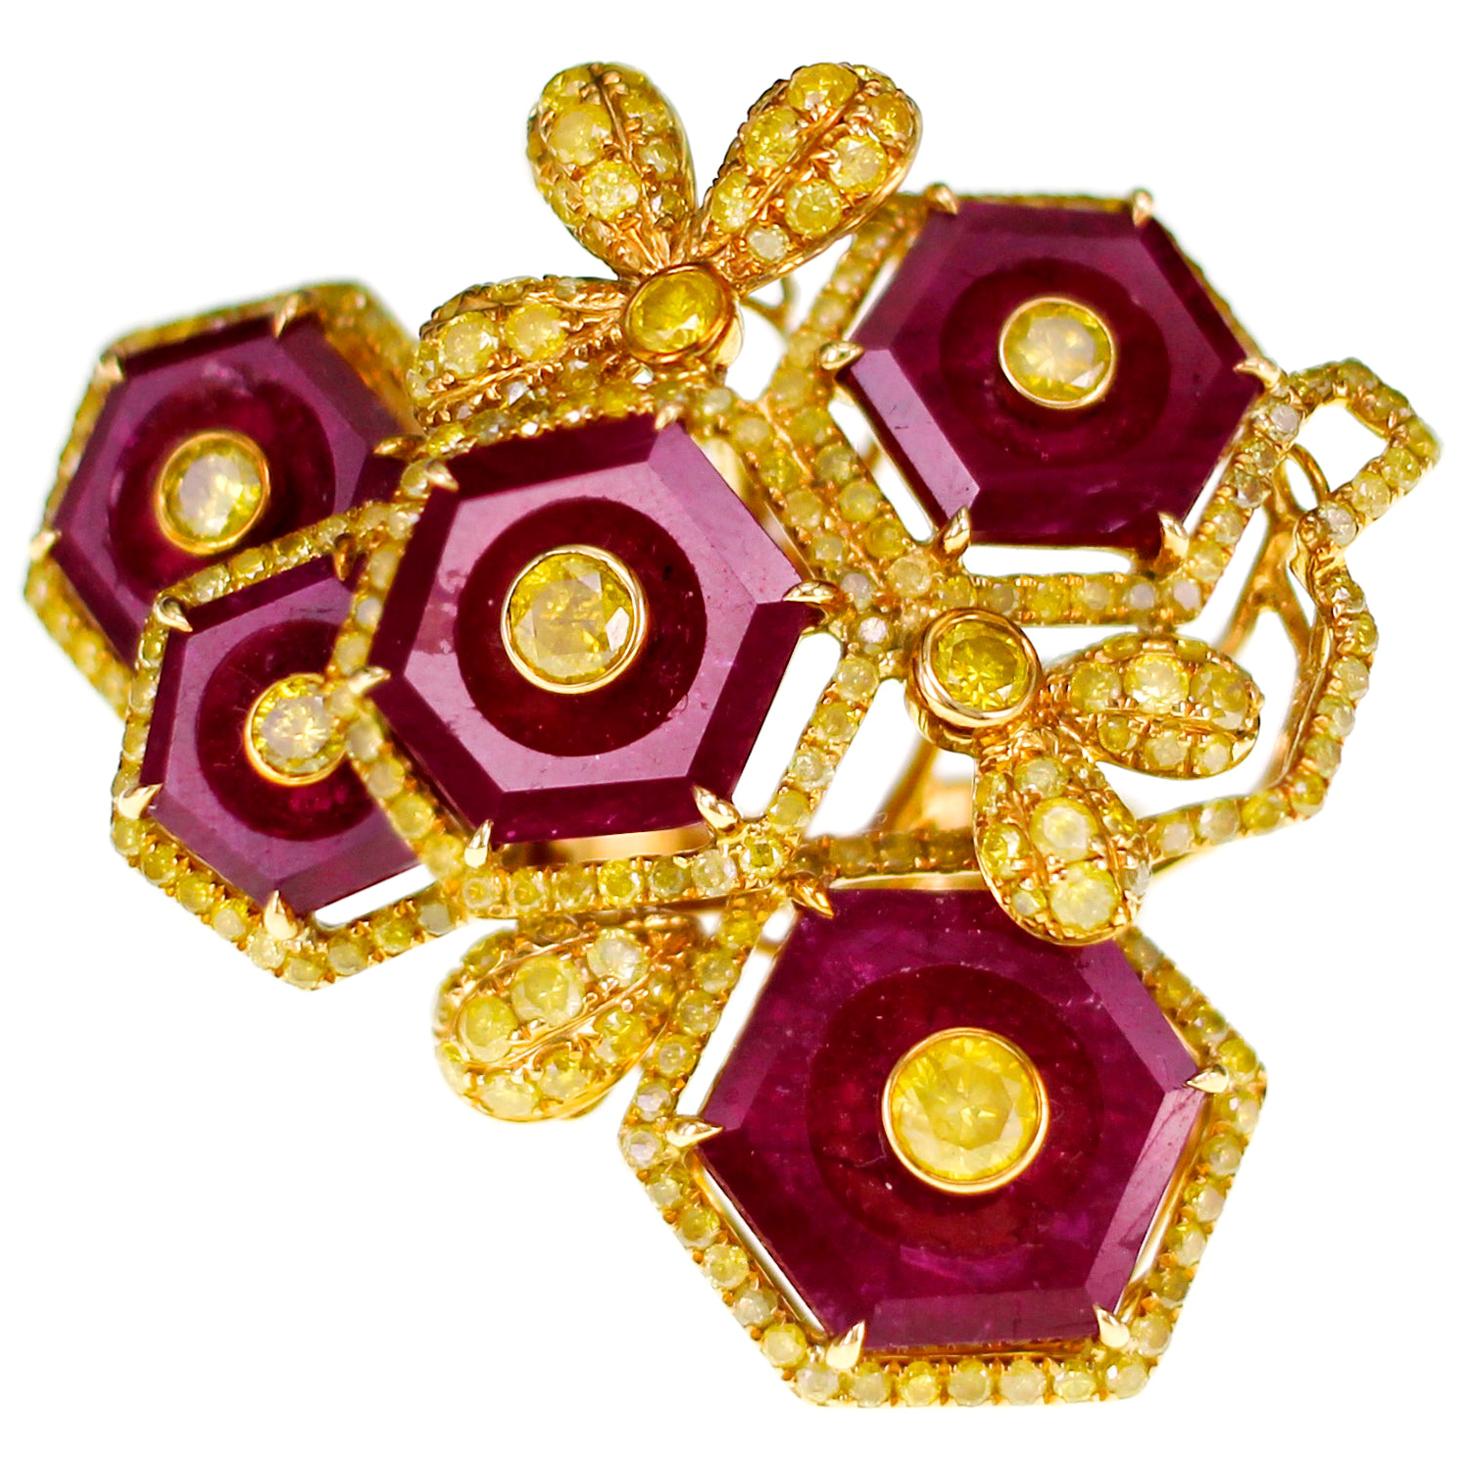 11.19 Carat Vivid Red Ruby with 2.78 Carat Fancy Vivid Yellow Diamond Ring For Sale